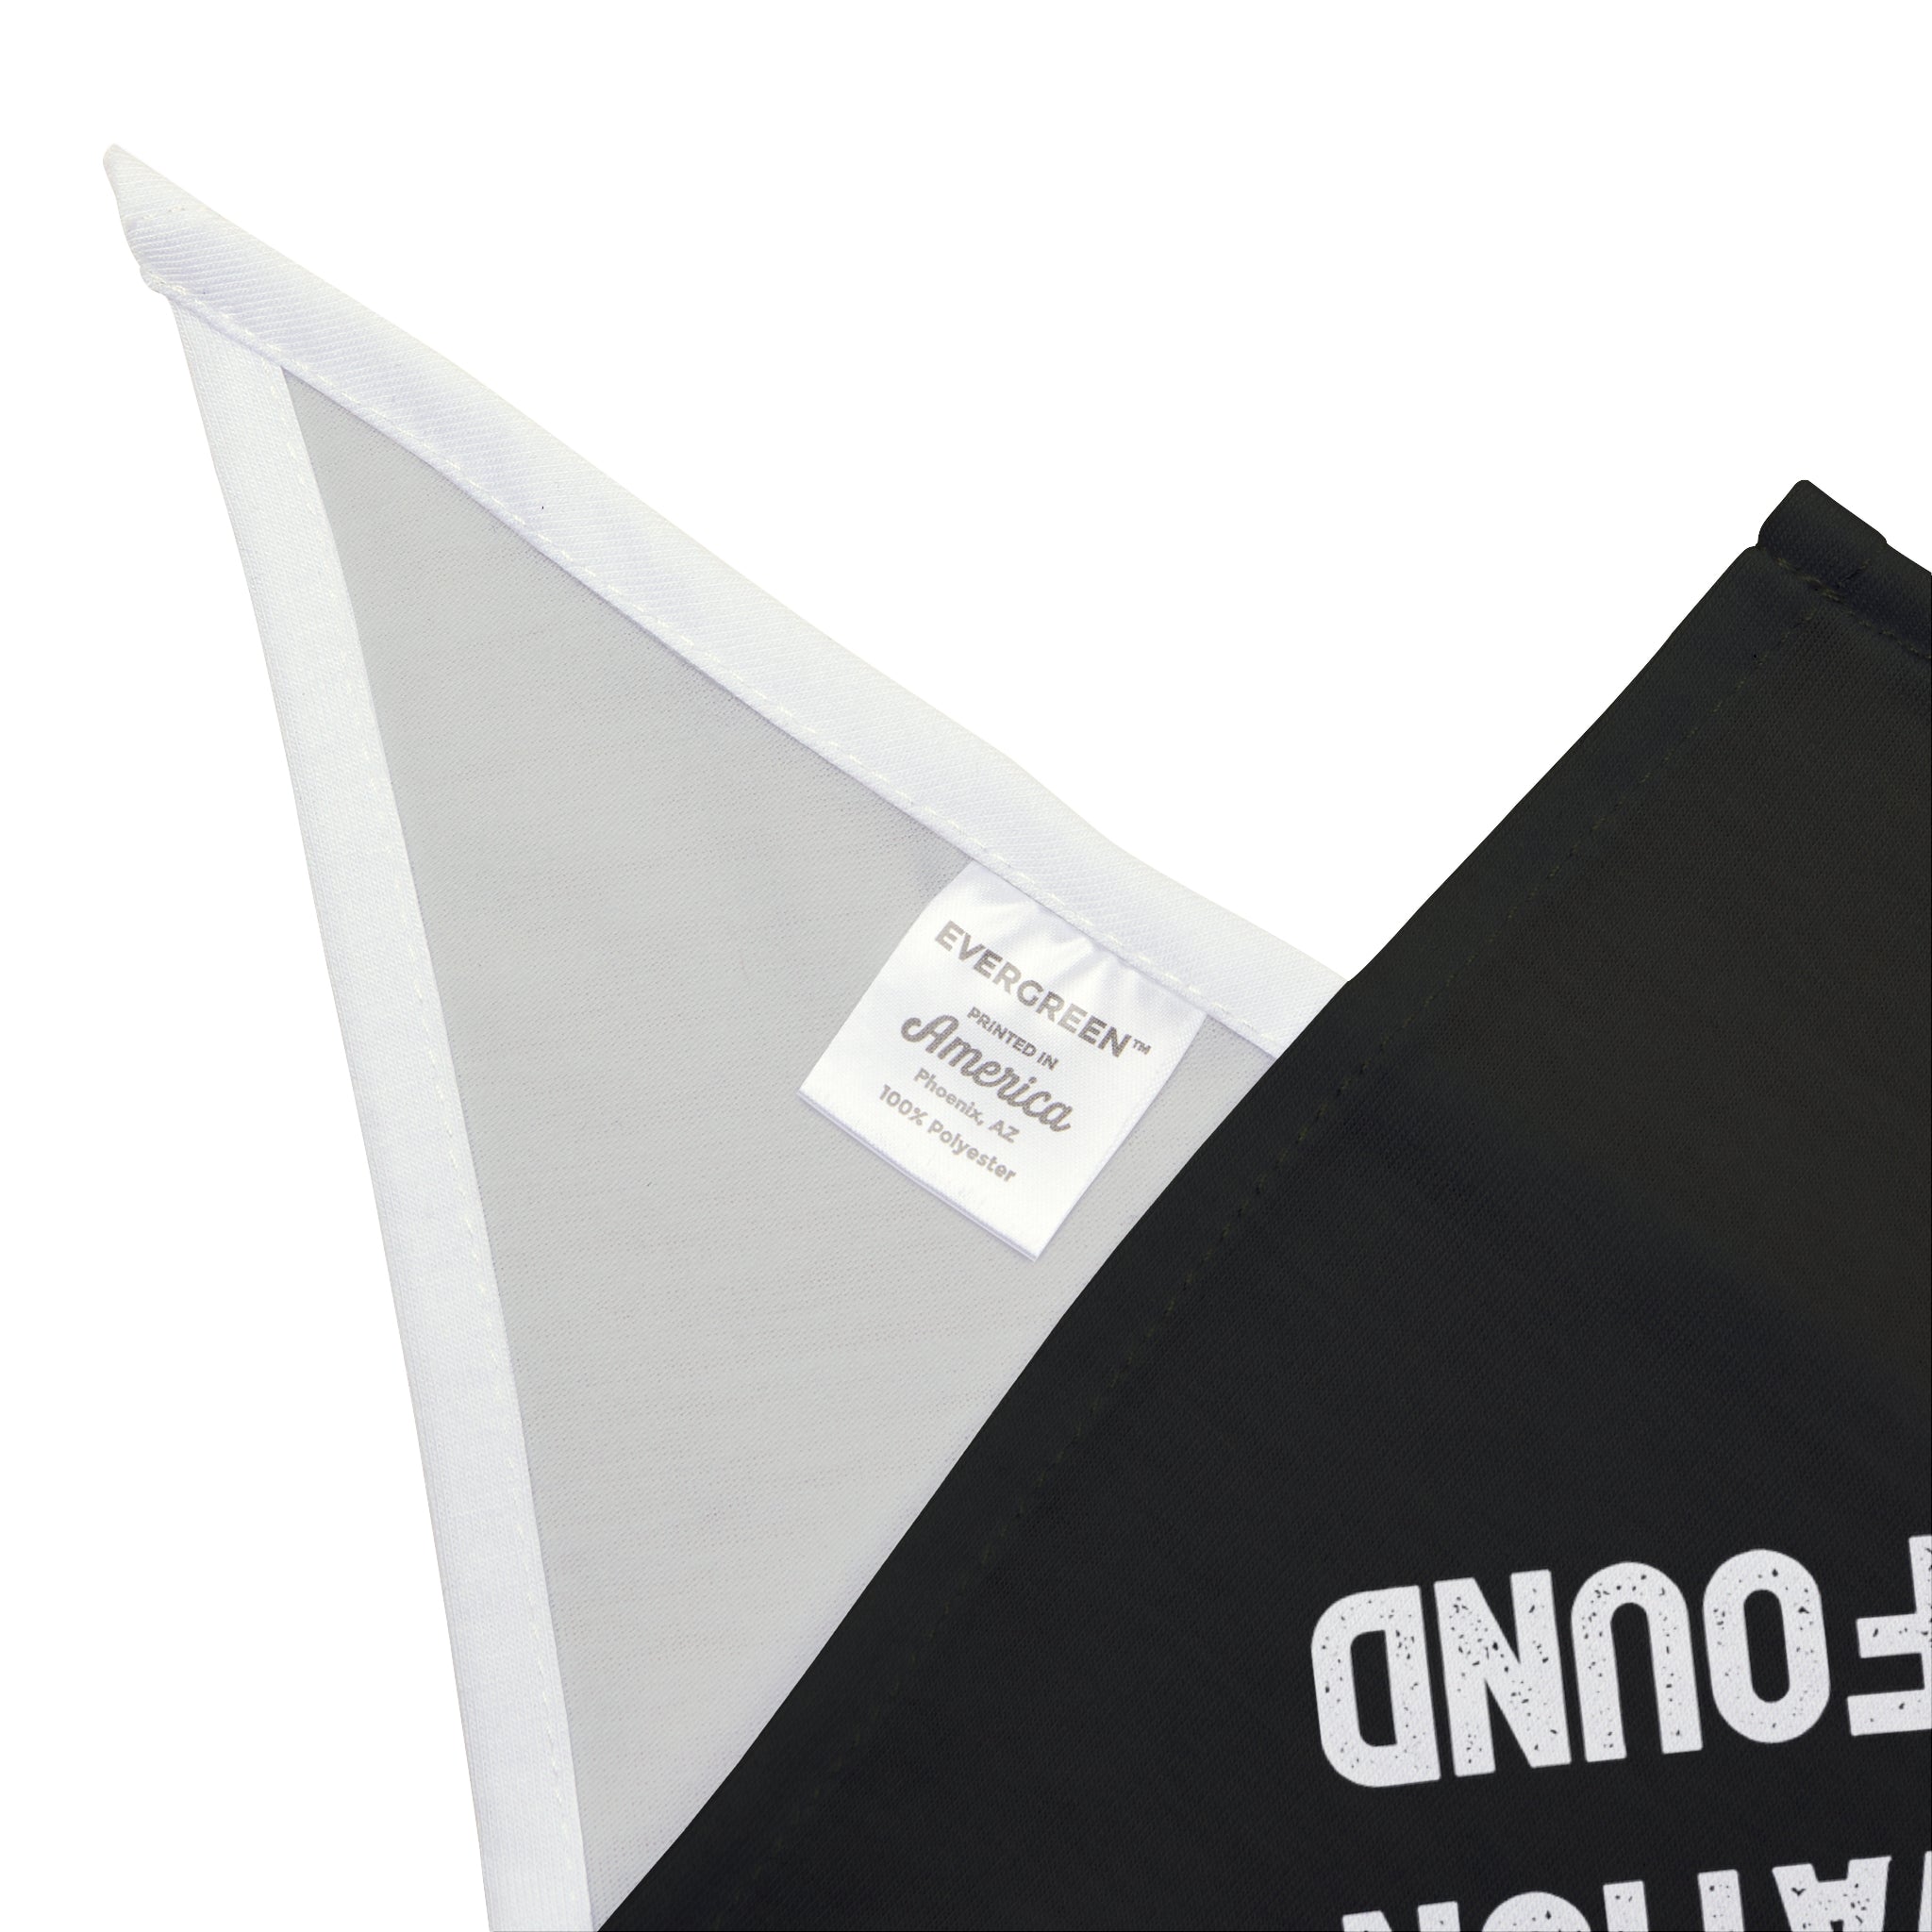 Close-up of an "Error 404: Motivation not found - Pet Bandana" tag on a black and white triangular flag made from soft-spun polyester with partial text visible, offering pet-friendly comfort.